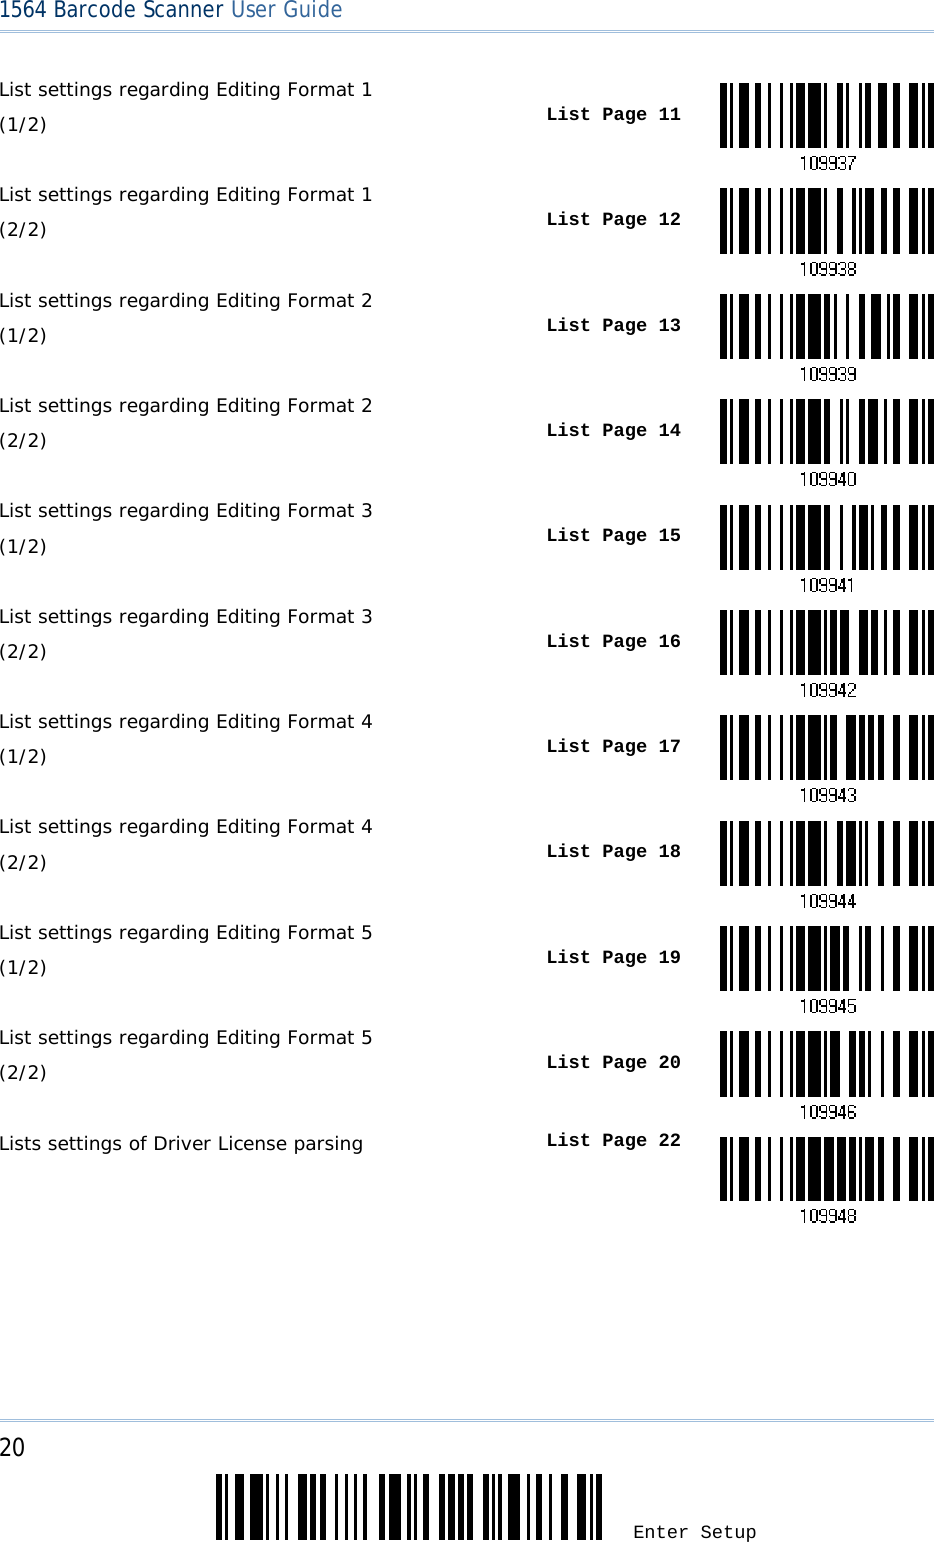 20 Enter Setup 1564 Barcode Scanner User Guide  List settings regarding Editing Format 1  (1/2)  List Page 11List settings regarding Editing Format 1  (2/2)  List Page 12List settings regarding Editing Format 2  (1/2)  List Page 13List settings regarding Editing Format 2  (2/2)  List Page 14List settings regarding Editing Format 3 (1/2)  List Page 15List settings regarding Editing Format 3 (2/2)  List Page 16List settings regarding Editing Format 4  (1/2)  List Page 17List settings regarding Editing Format 4  (2/2)  List Page 18List settings regarding Editing Format 5 (1/2)  List Page 19List settings regarding Editing Format 5 (2/2)  List Page 20Lists settings of Driver License parsing  List Page 22   